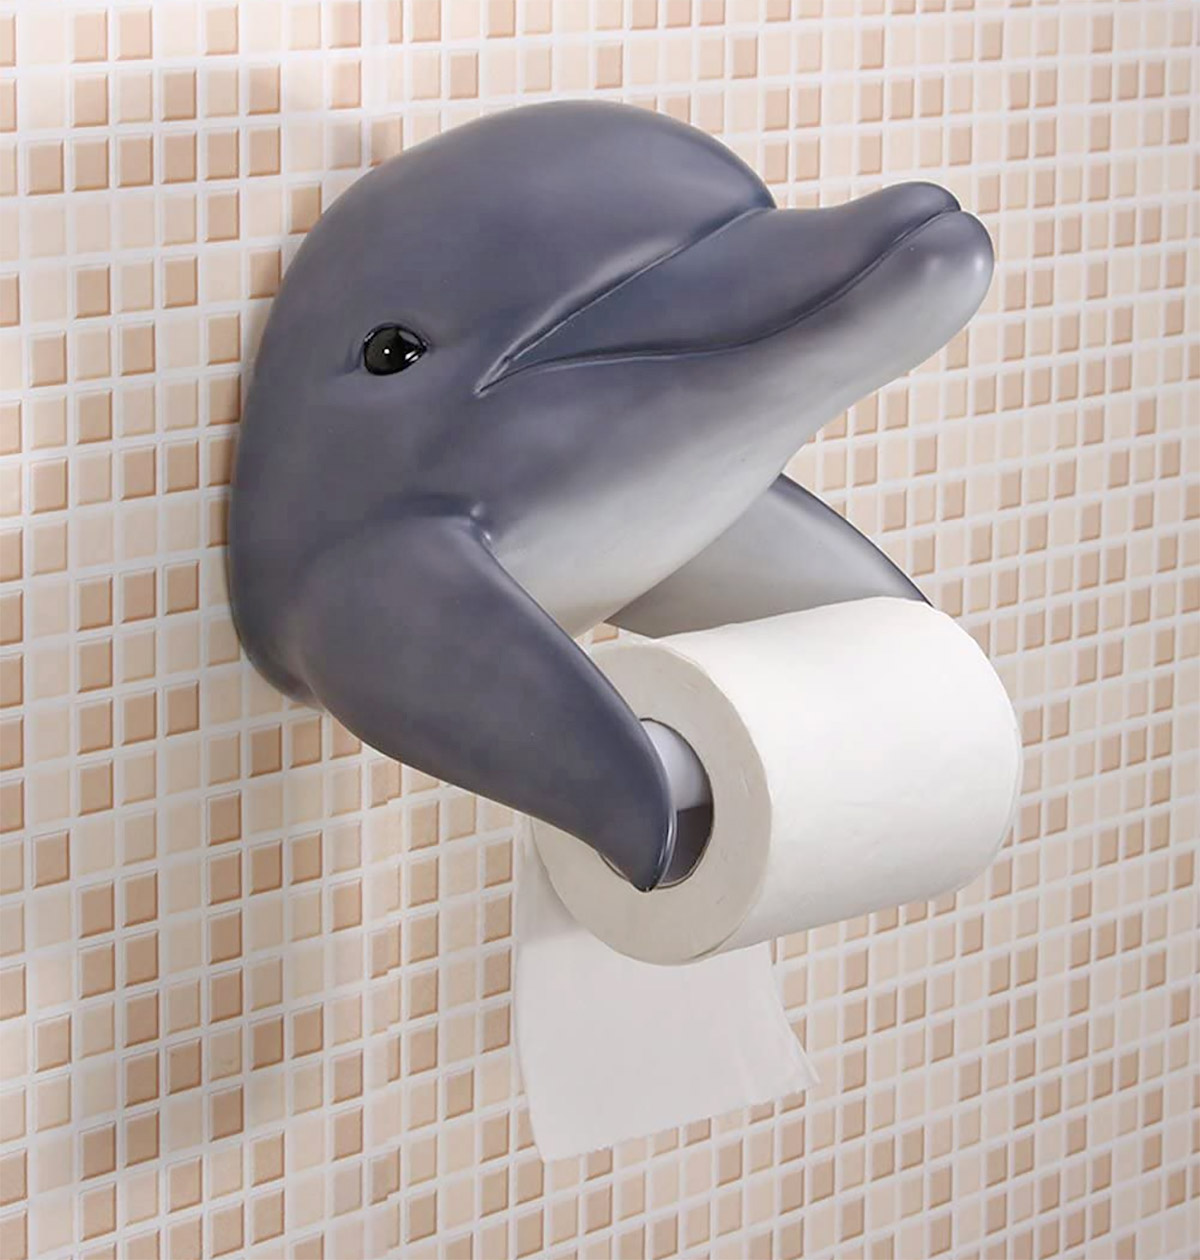 I'm Not Sure Why I Need This Dolphin Toilet Paper Holder